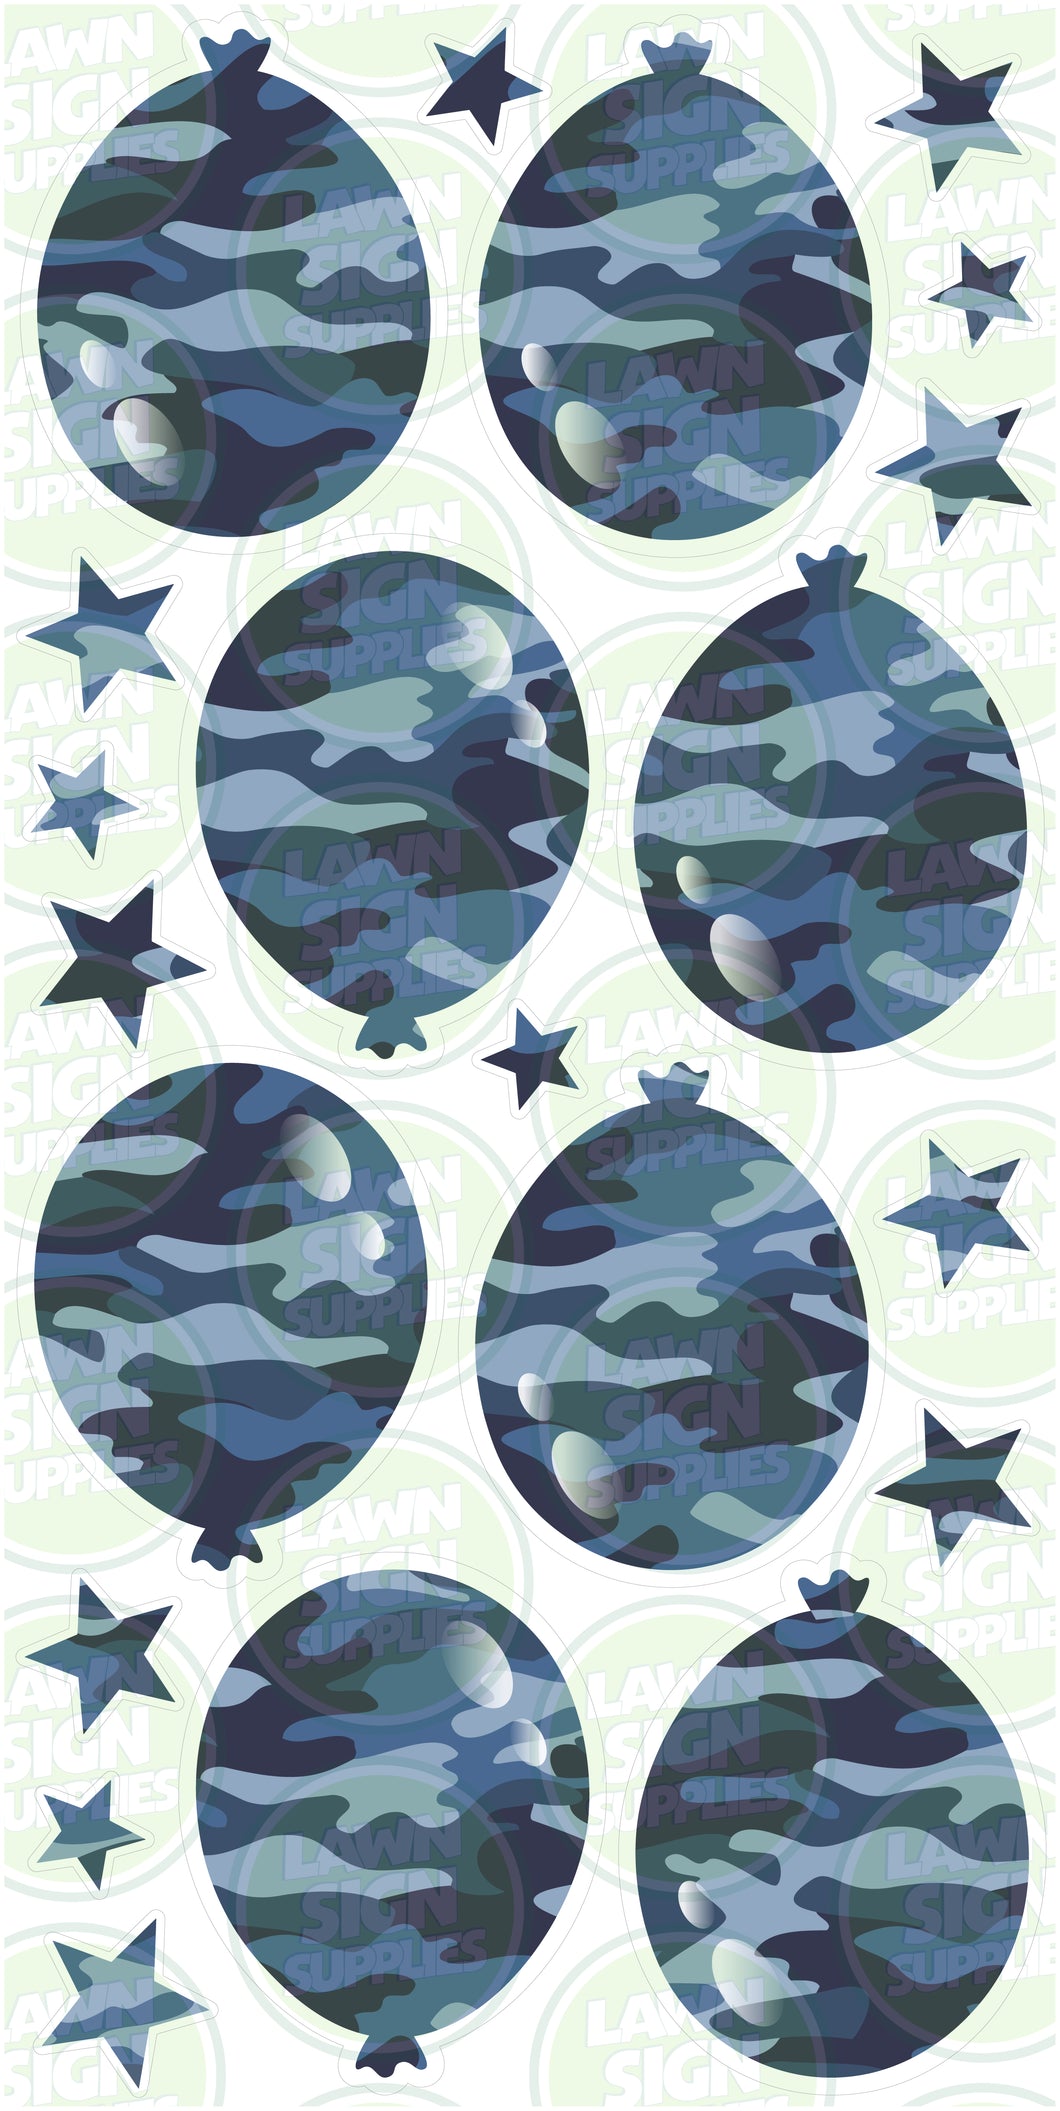 PATTERNED BALLOONS - CAMOUFLAGE BLUE